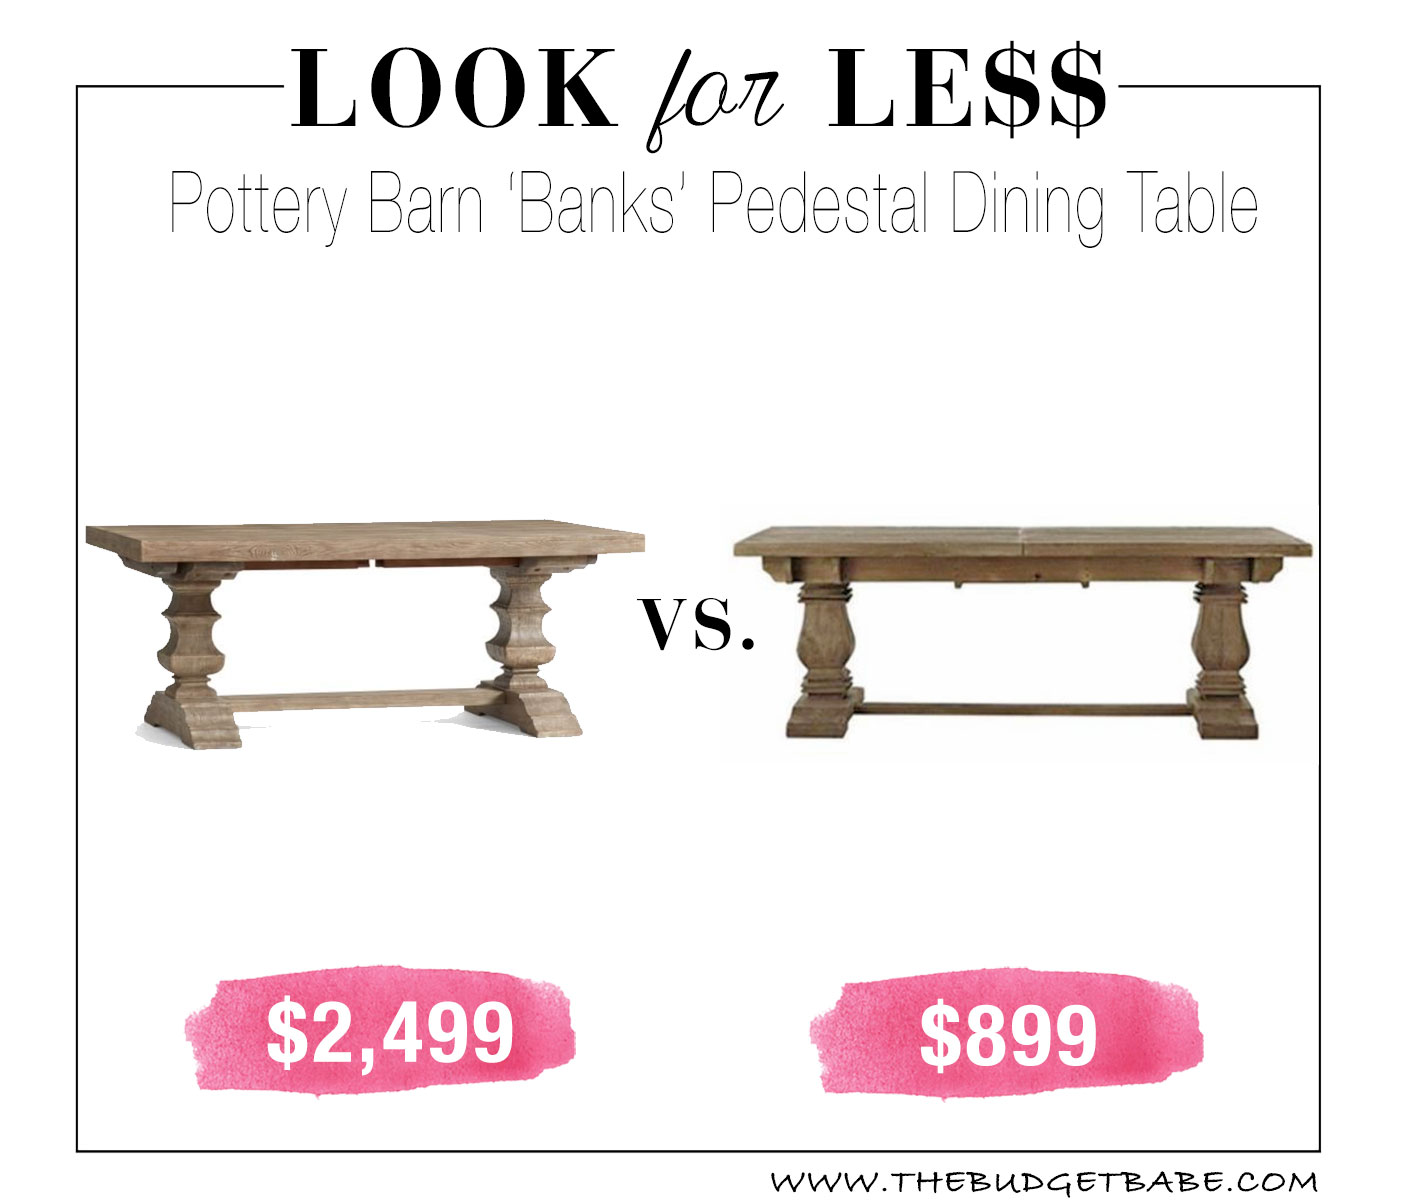 Pottery Barn lookalike dining table at Home Depot?!